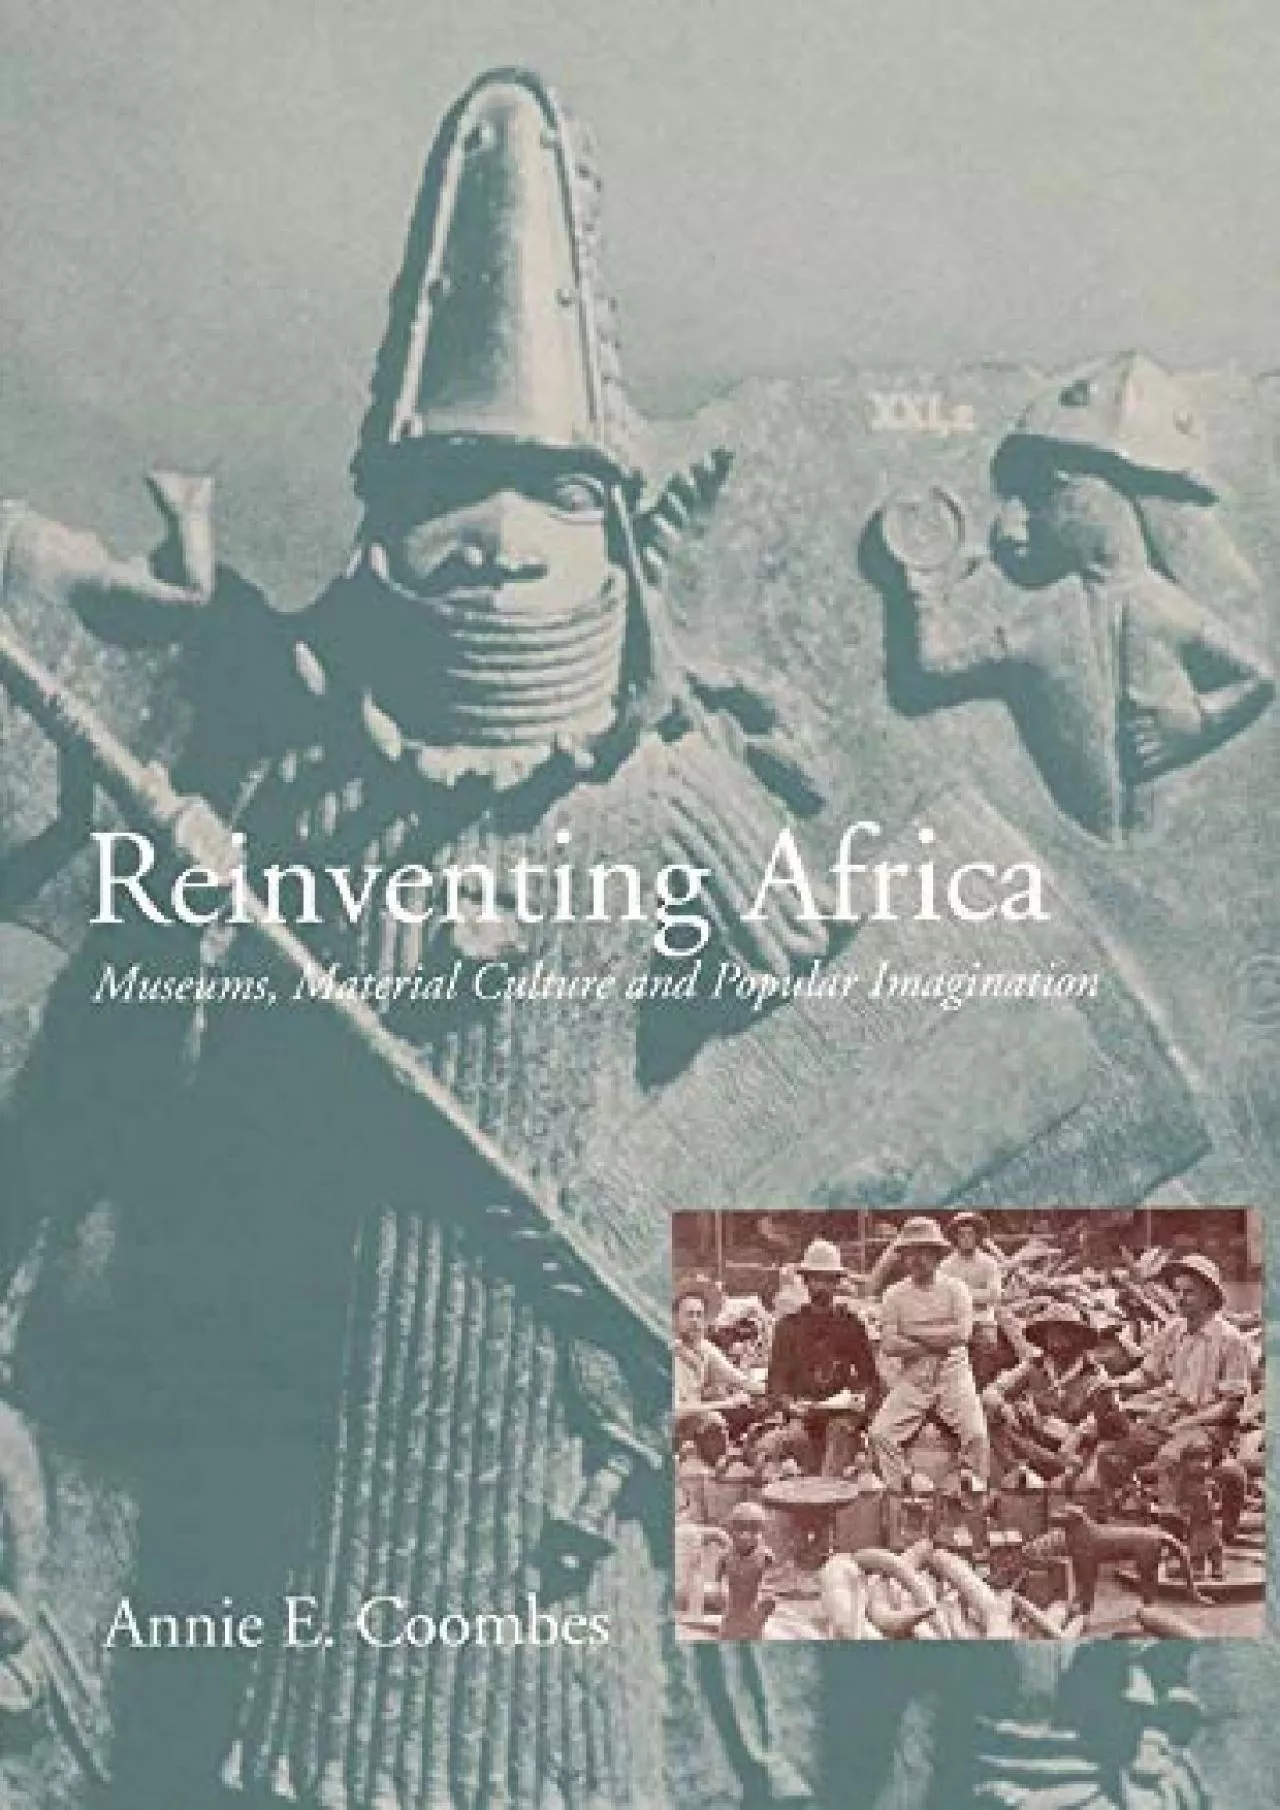 (BOOK)-Reinventing Africa: Museums, Material Culture and Popular Imagination in Late Victorian